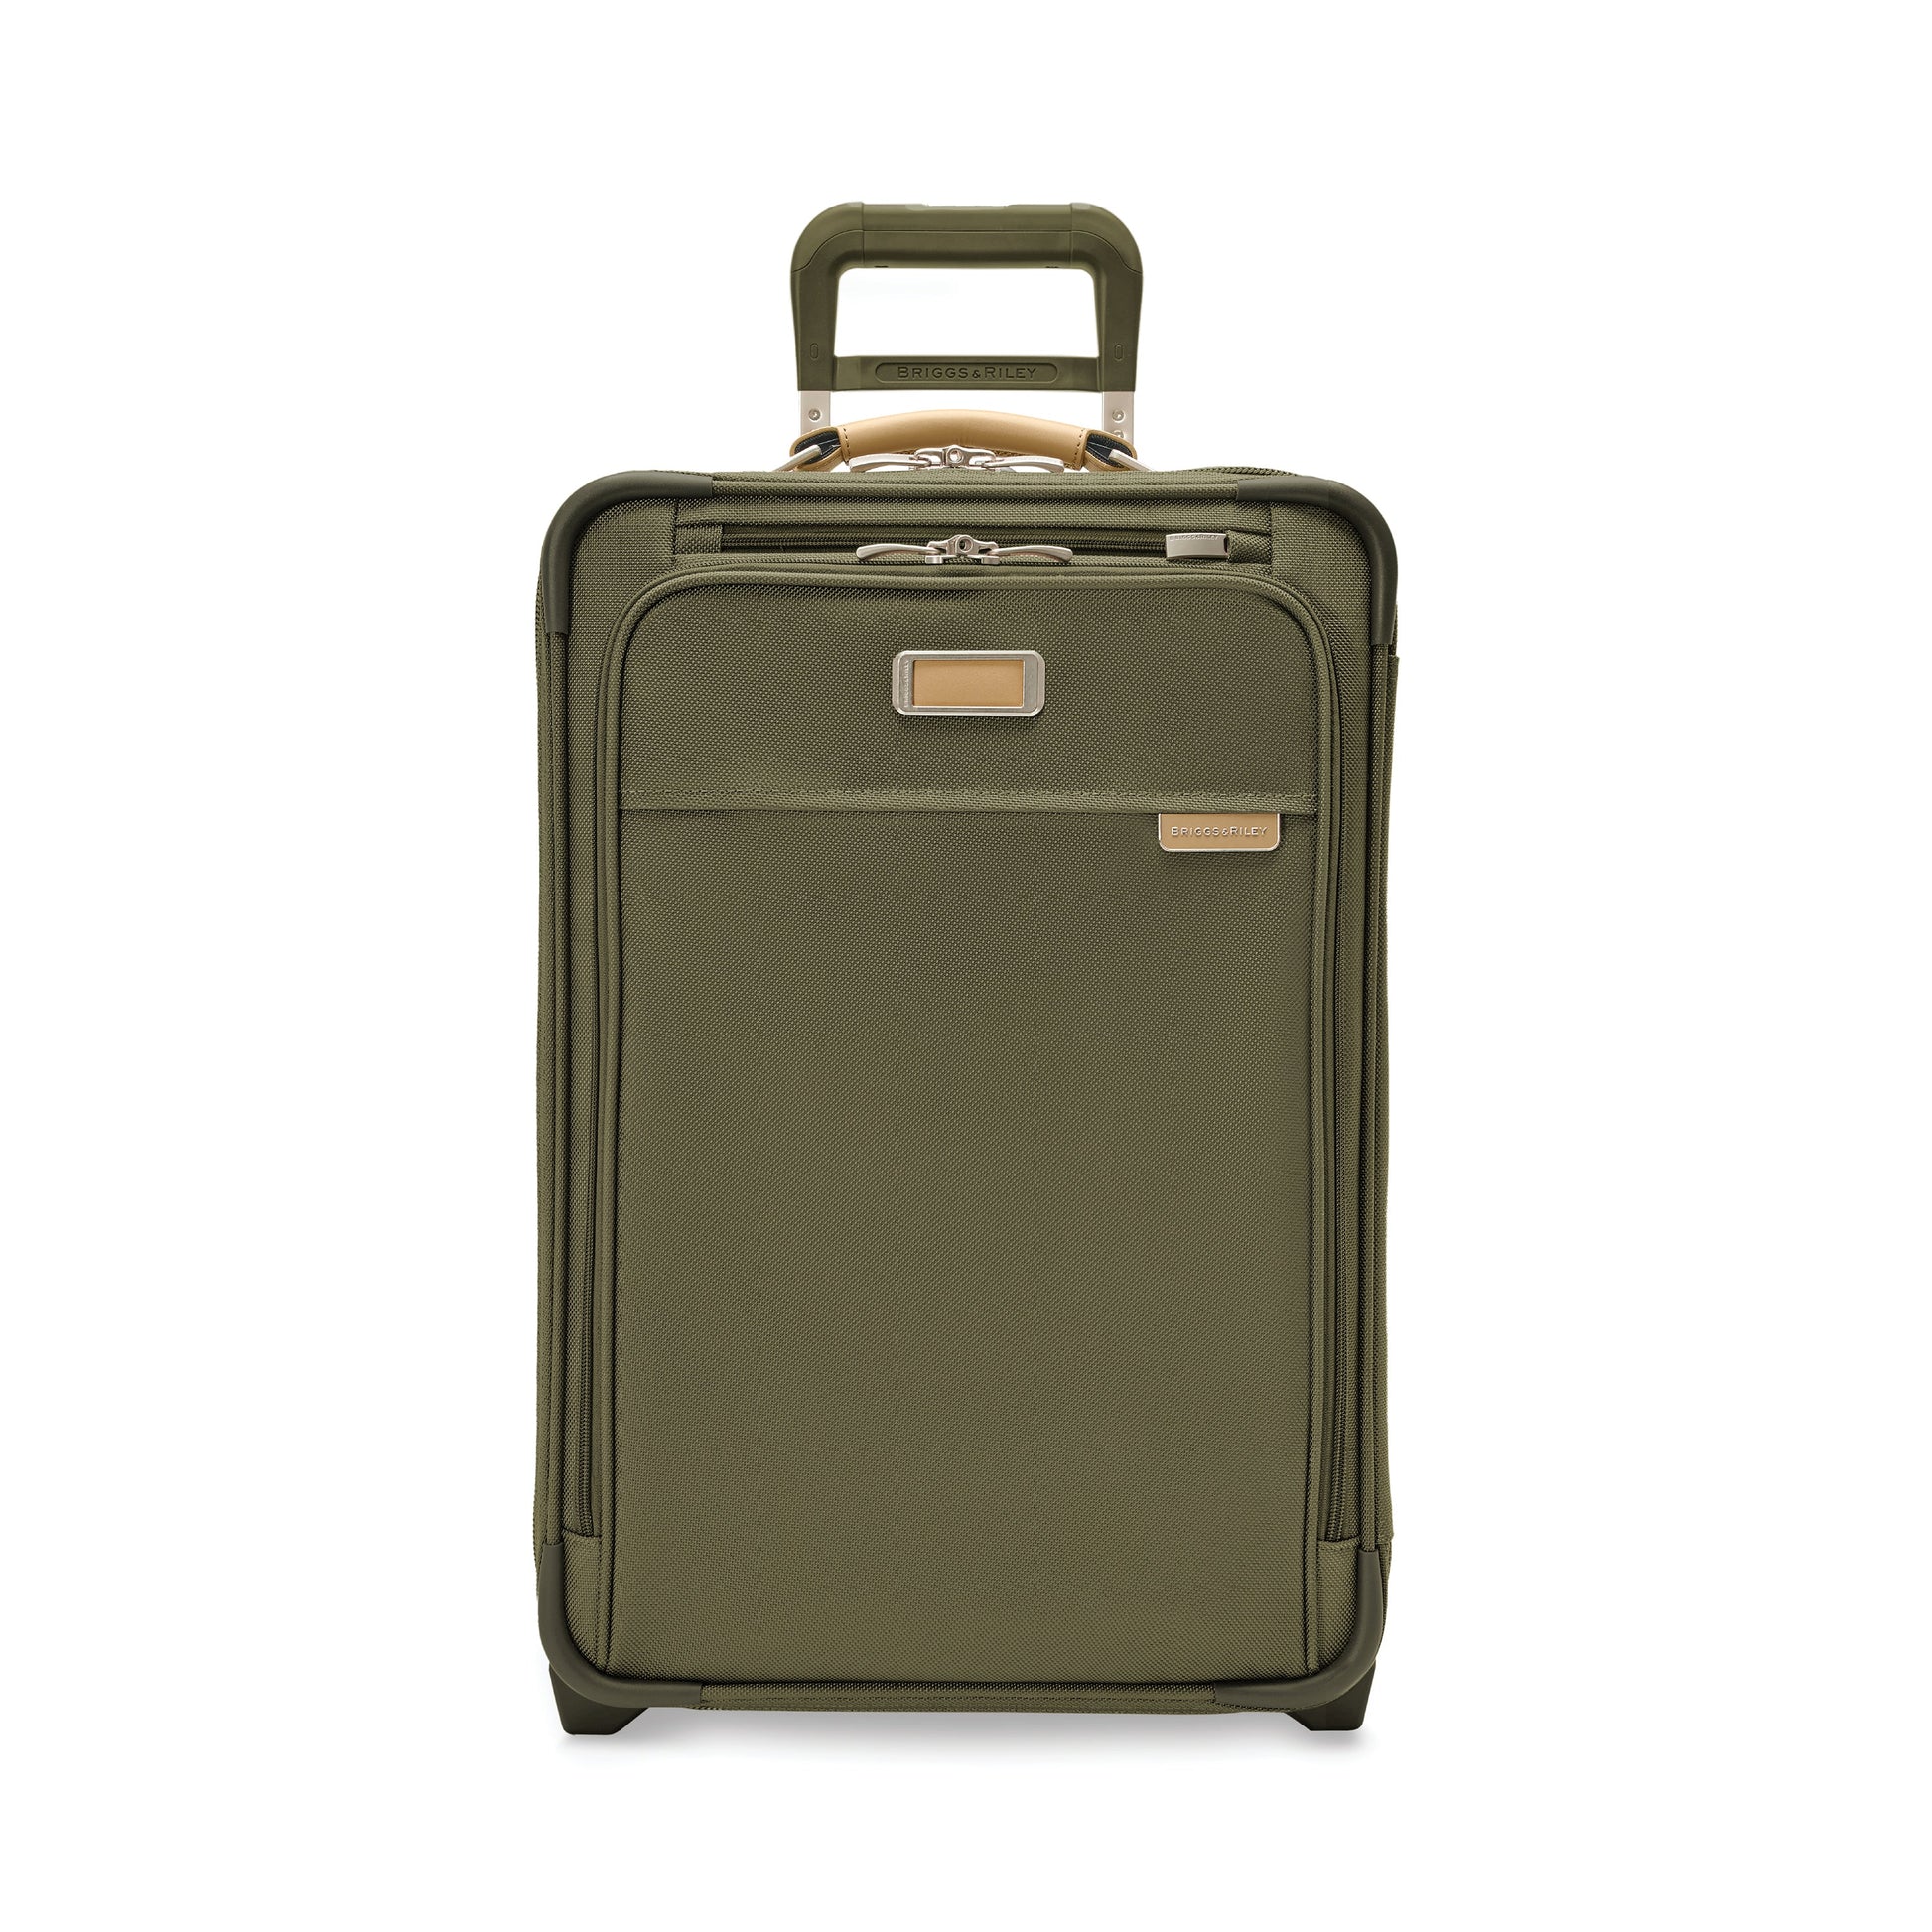 Briggs & Riley NEW Baseline Essential 2-Wheel Carry-On Luggage - Olive